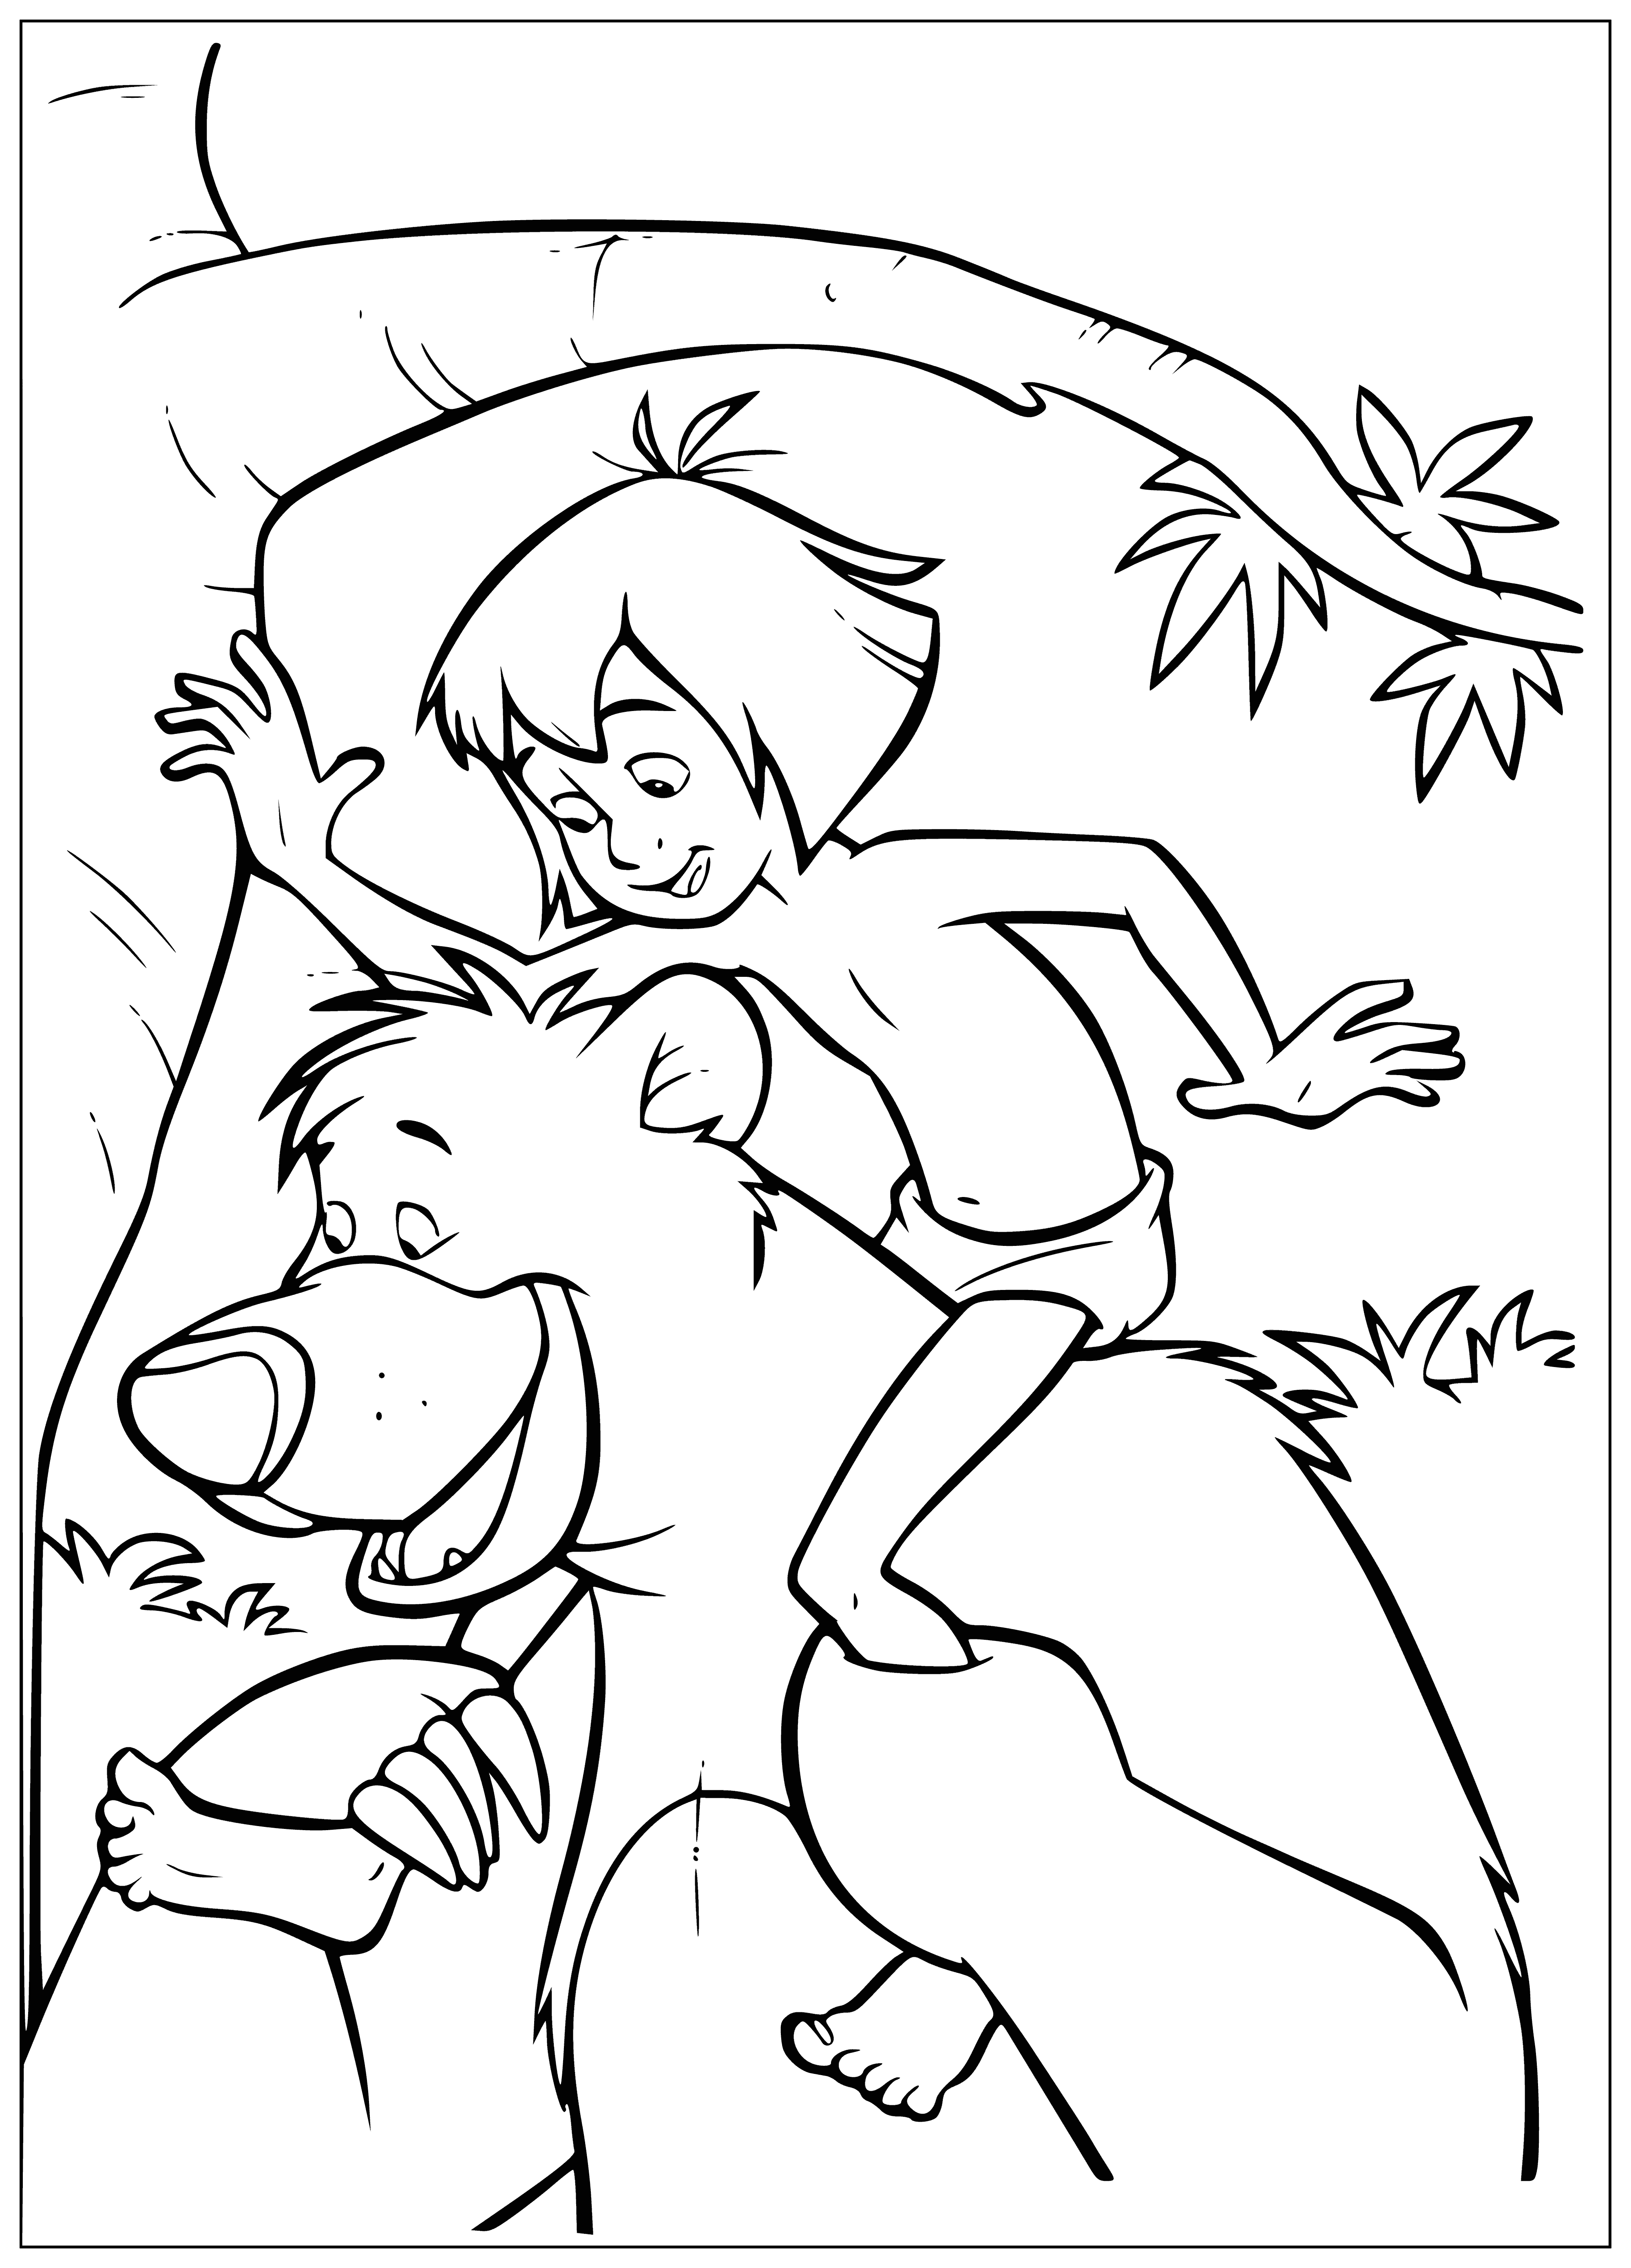 coloring page: Boy and bear swing on vine, boy with dark hair & loincloth, bear with cub, both happy in jungle.